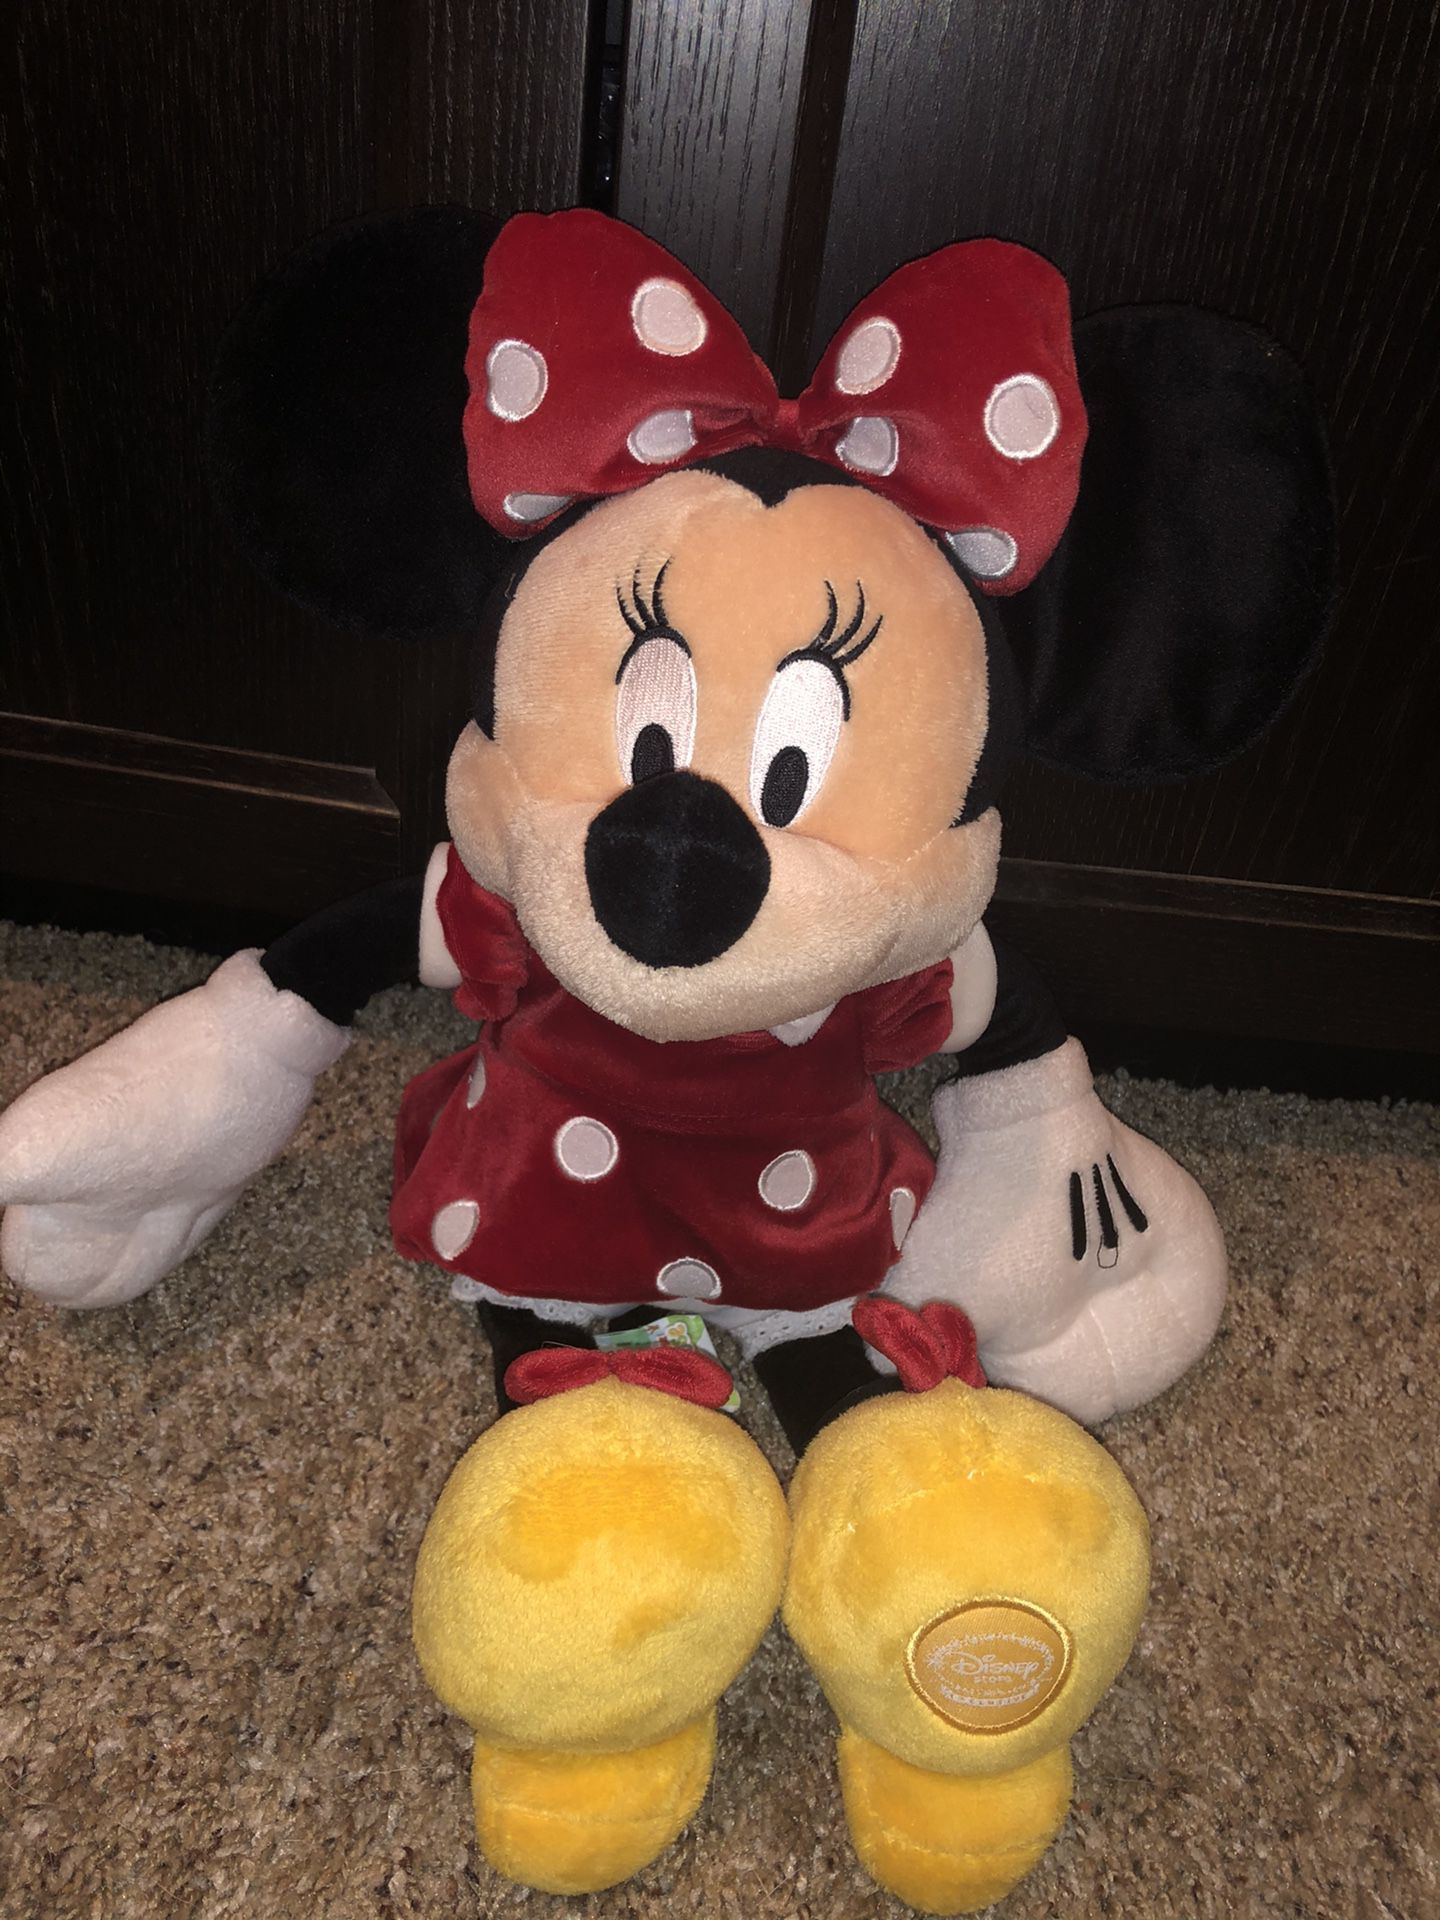 Disney Mickey Mouse Clubhouse / Disney Store 18” Minnie Mouse plush plushie doll